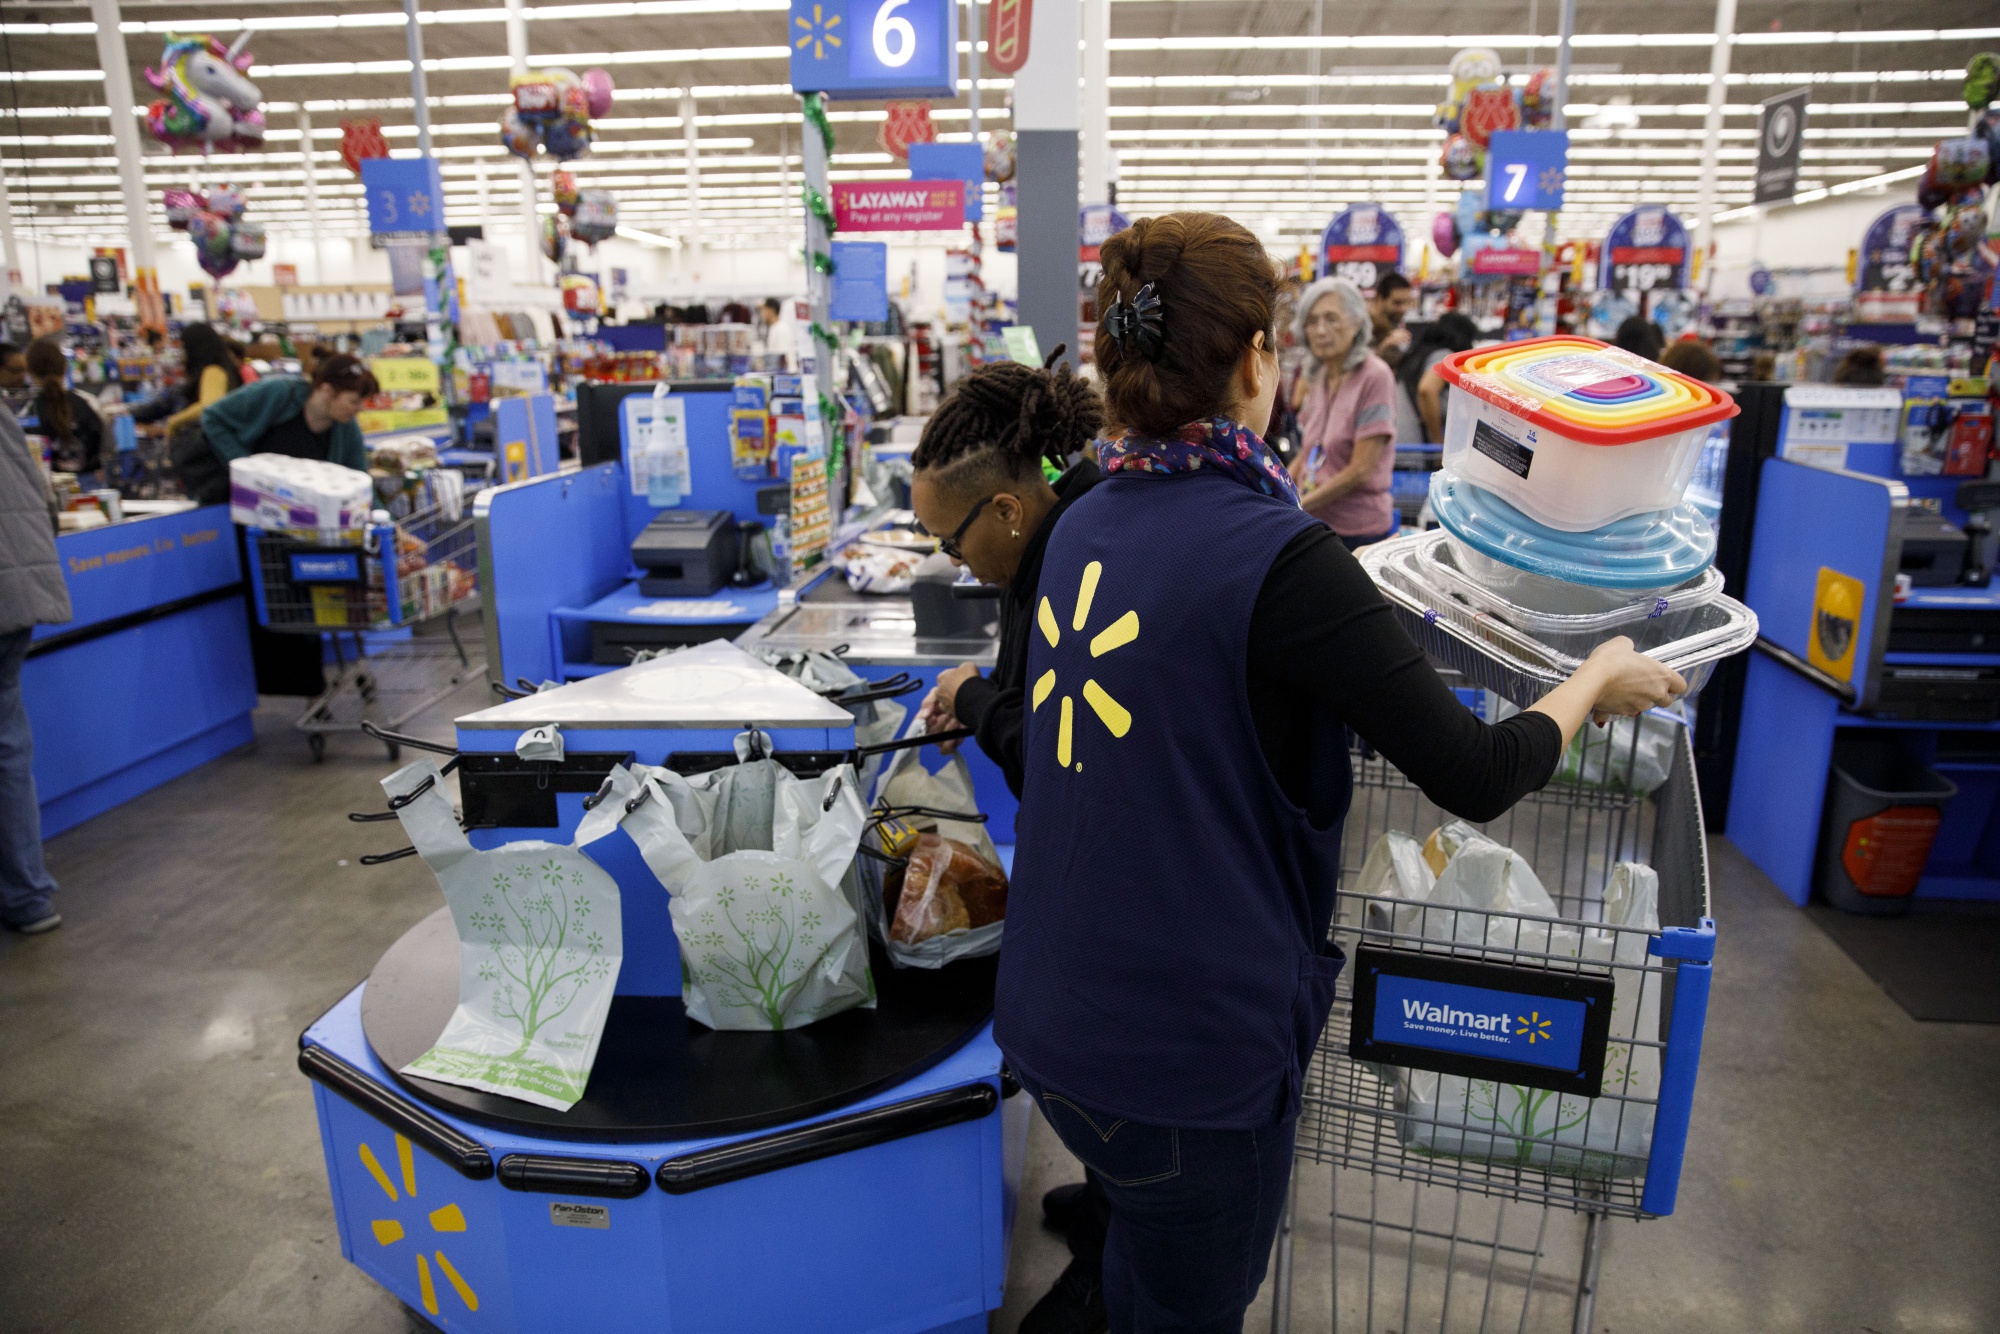 Walmart Earnings: Retailer's Sales and Profits Rise, Fueled by